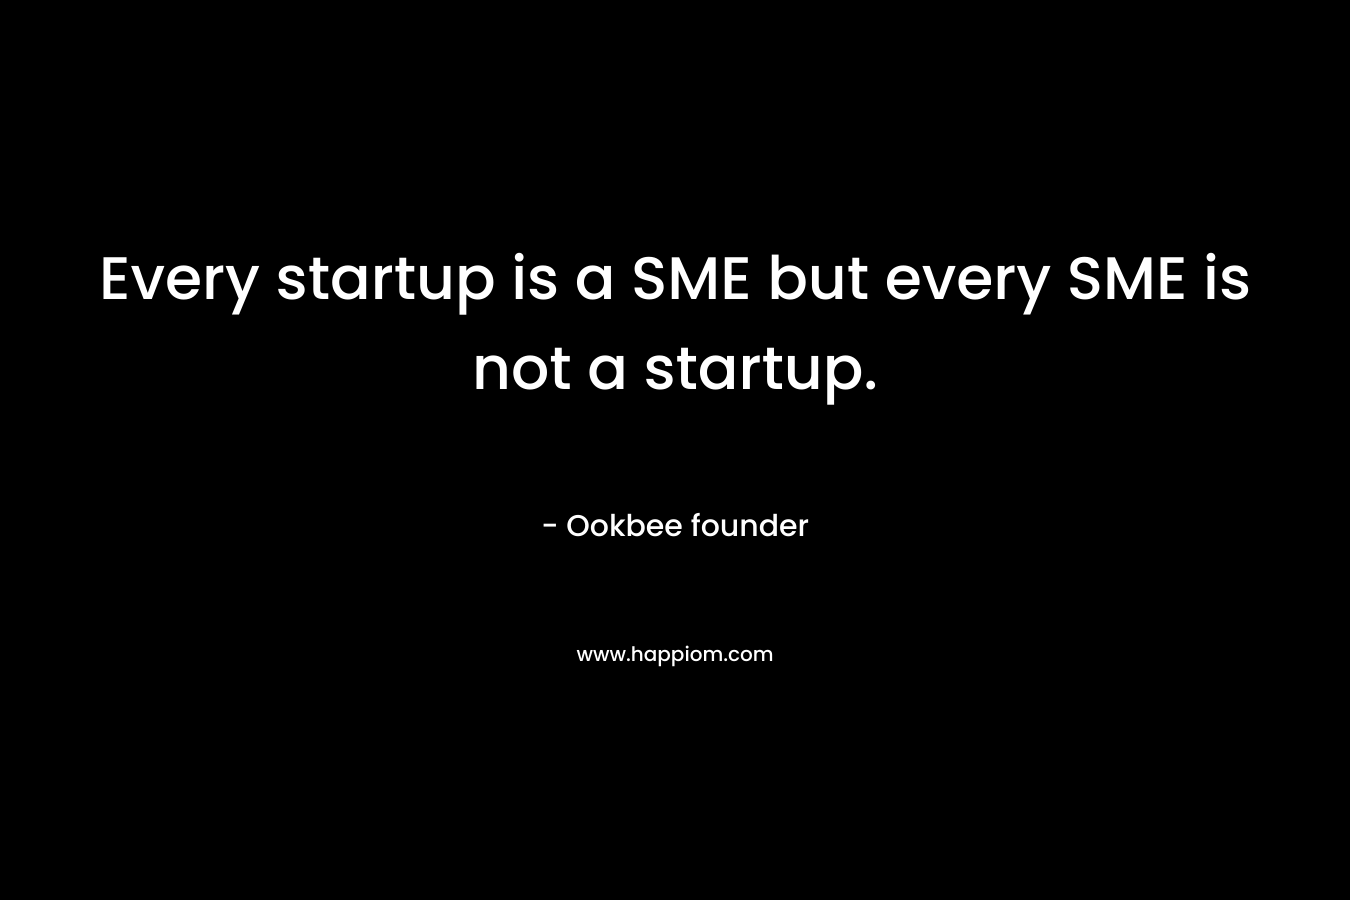 Every startup is a SME but every SME is not a startup. – Ookbee founder